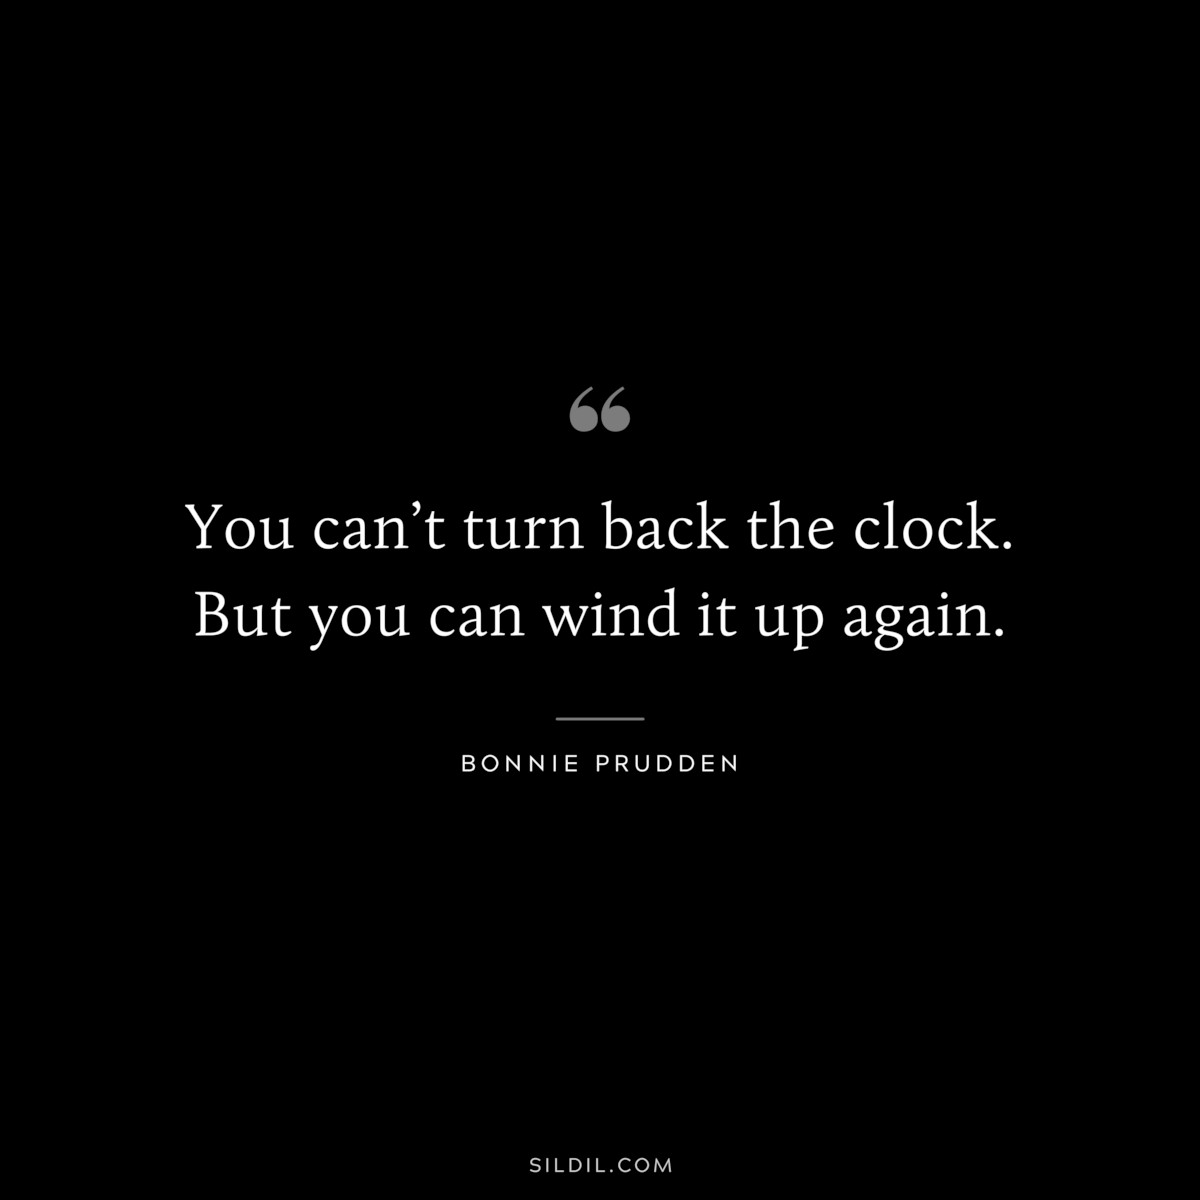 You can’t turn back the clock. But you can wind it up again. ― Bonnie Prudden